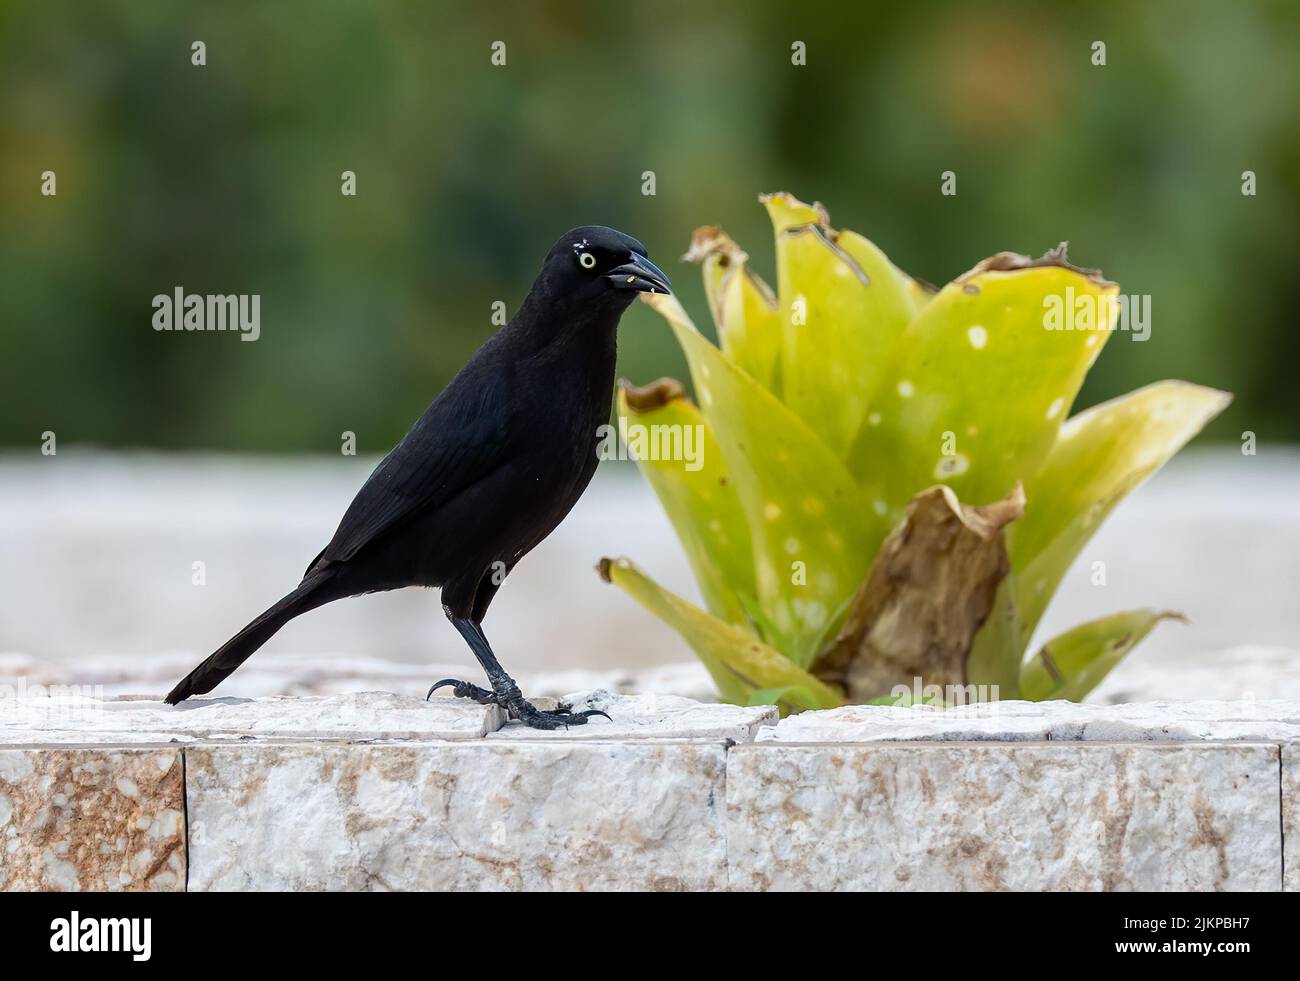 A closeup shot of a Carib grackle bird standing next to a Catopsis berteroniana with blurred green background Stock Photo